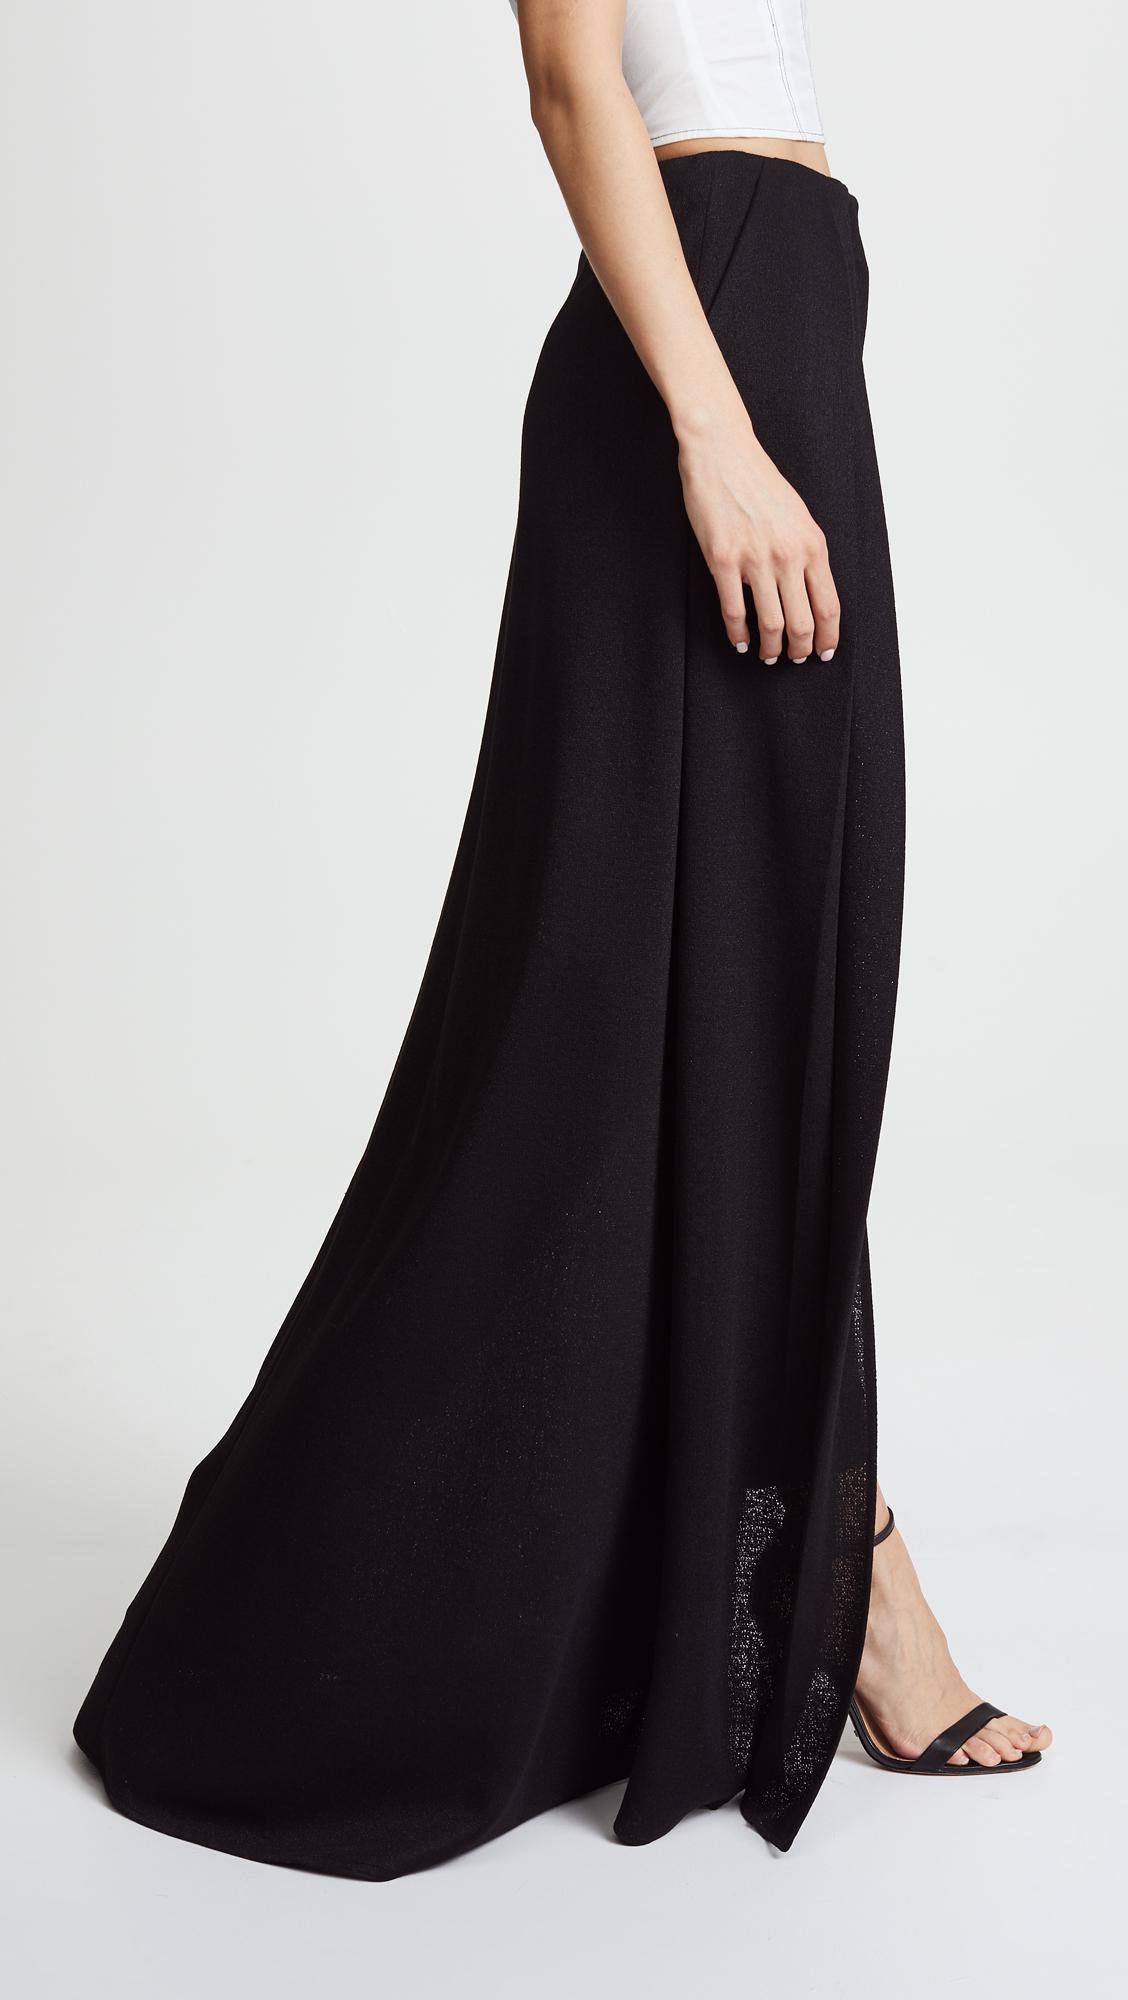 Hellessy Synthetic River Slim Pants With Skirt Overlay in Black - Lyst